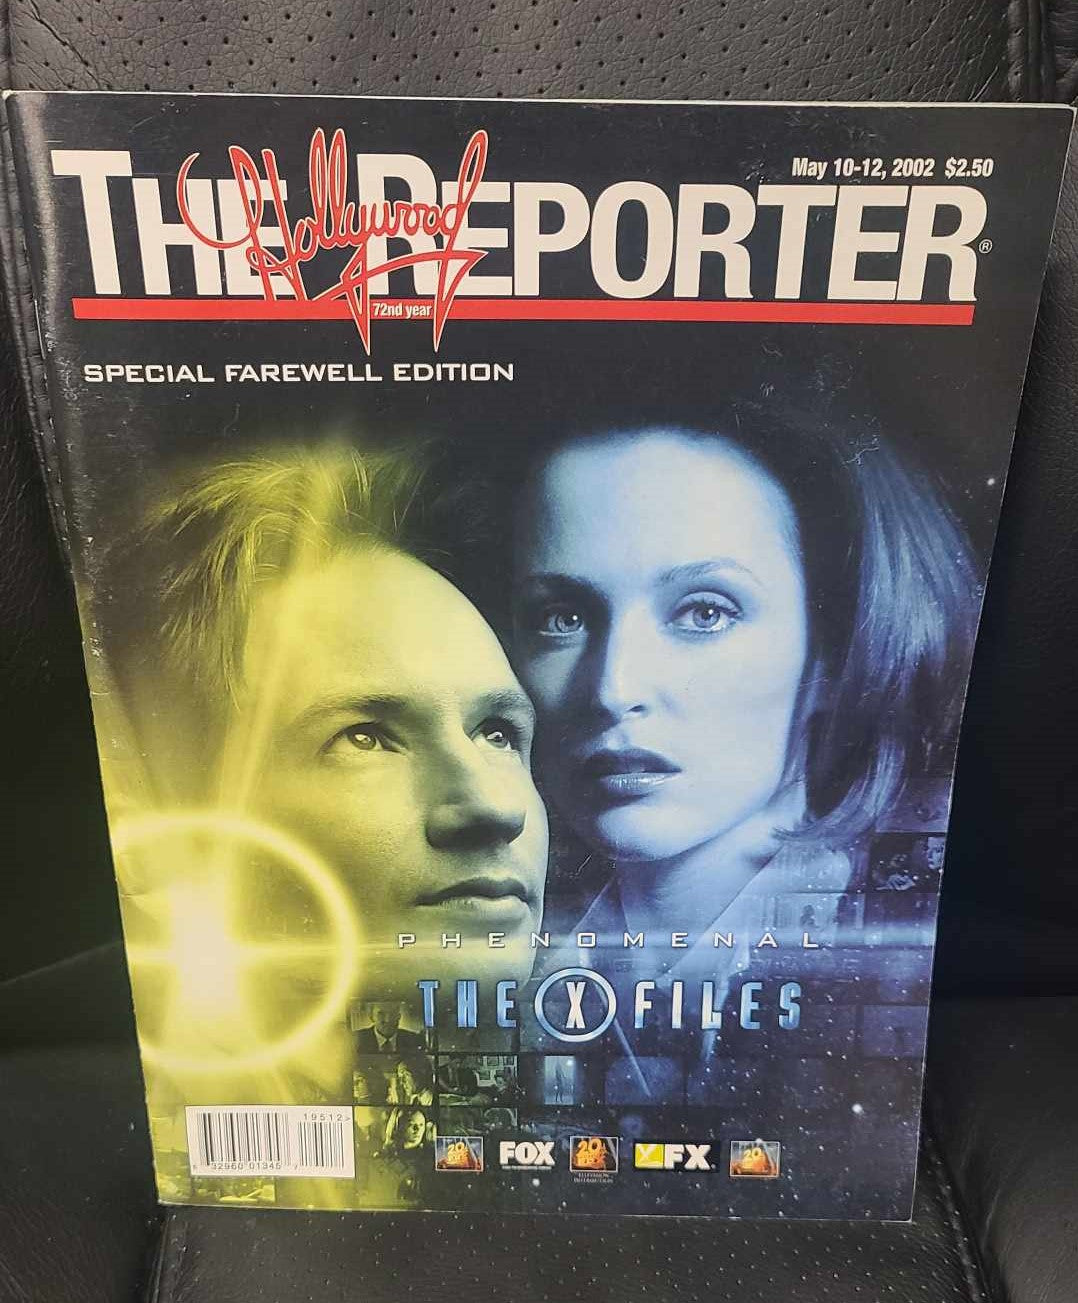 x-Files Farewell edition - Hollywood Reporter Magazine